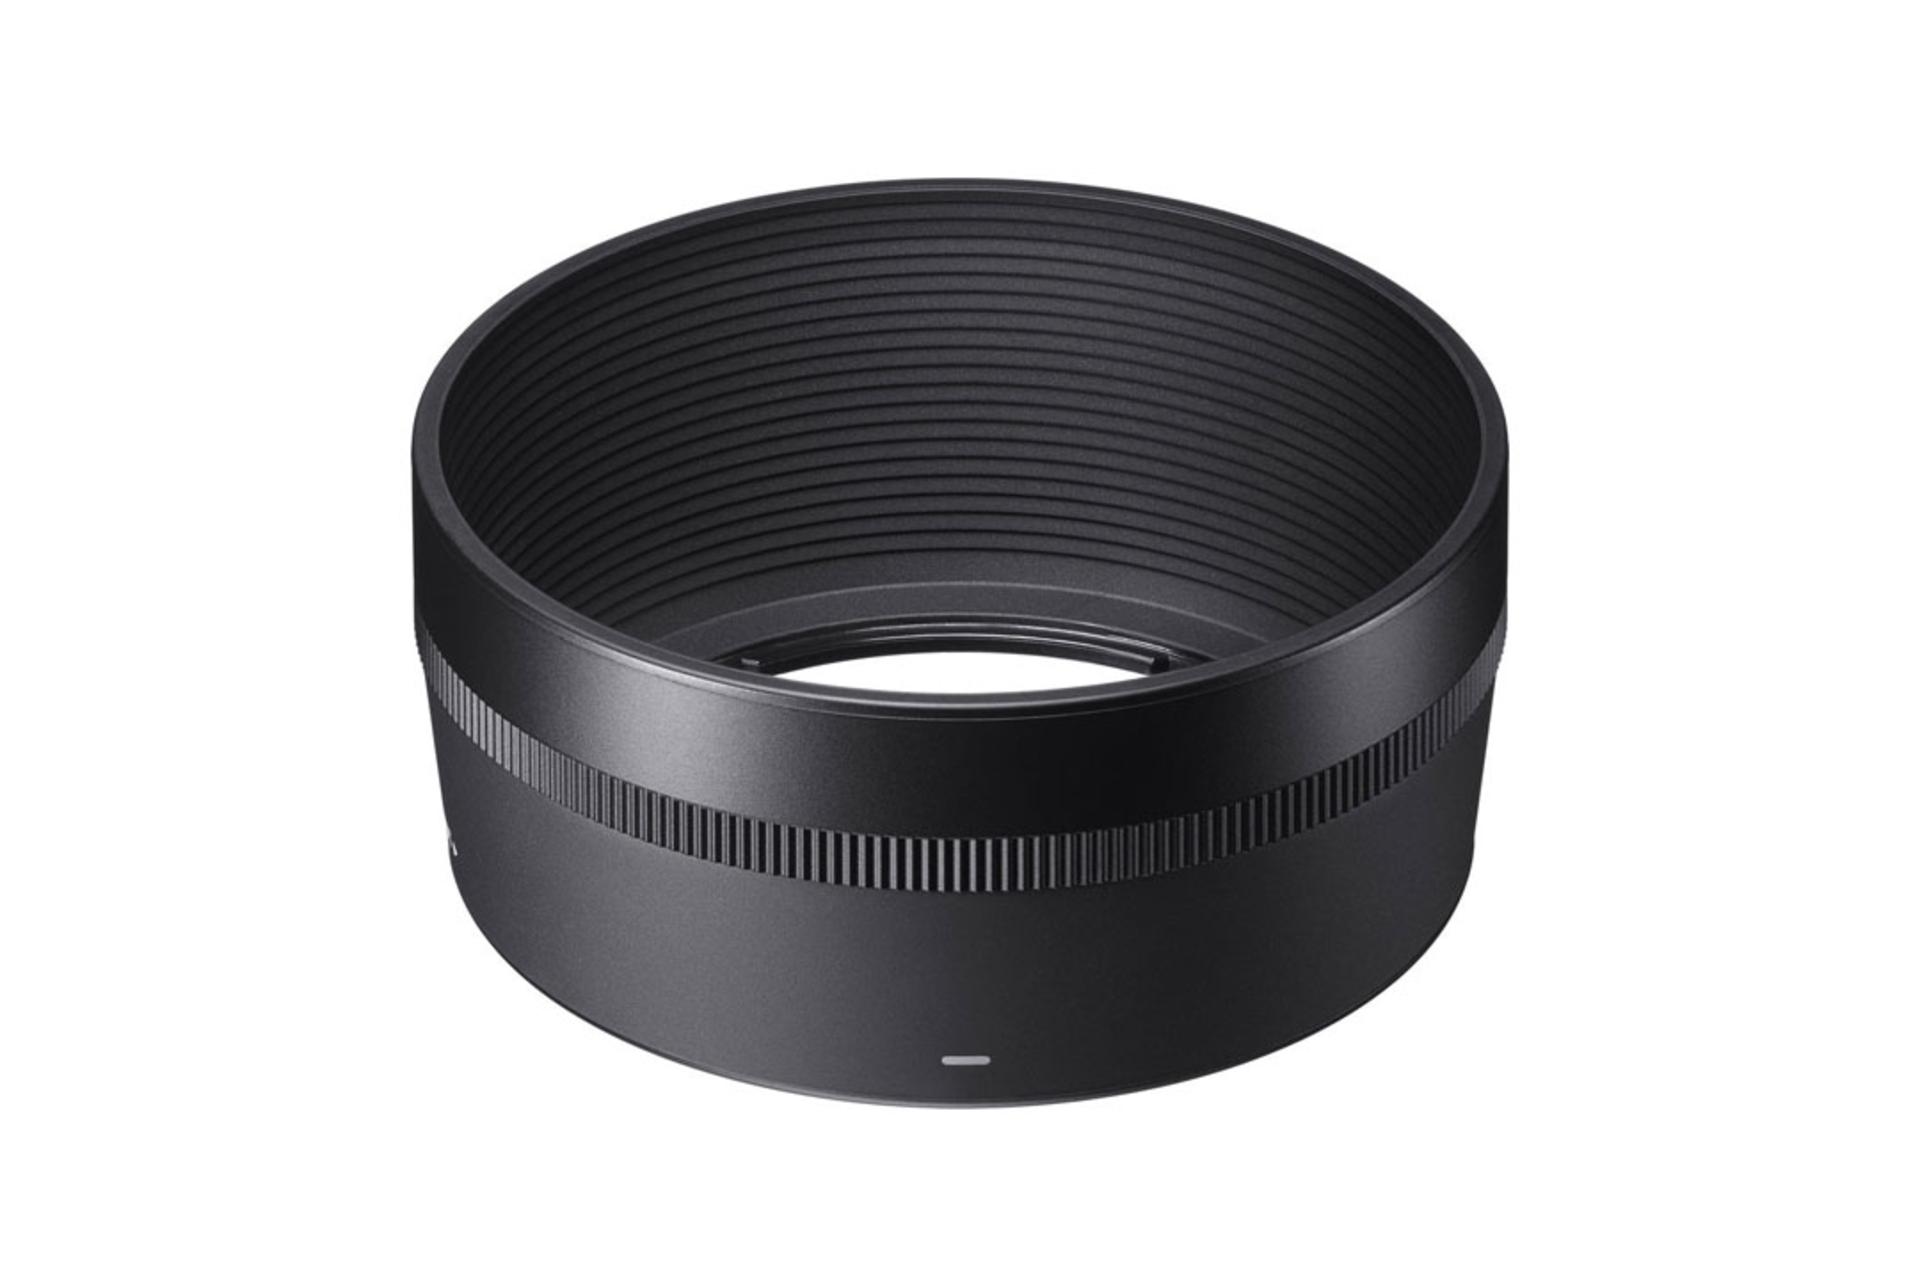 Sigma 30mm F1.4 DC DN | C for Micro Four Thirds